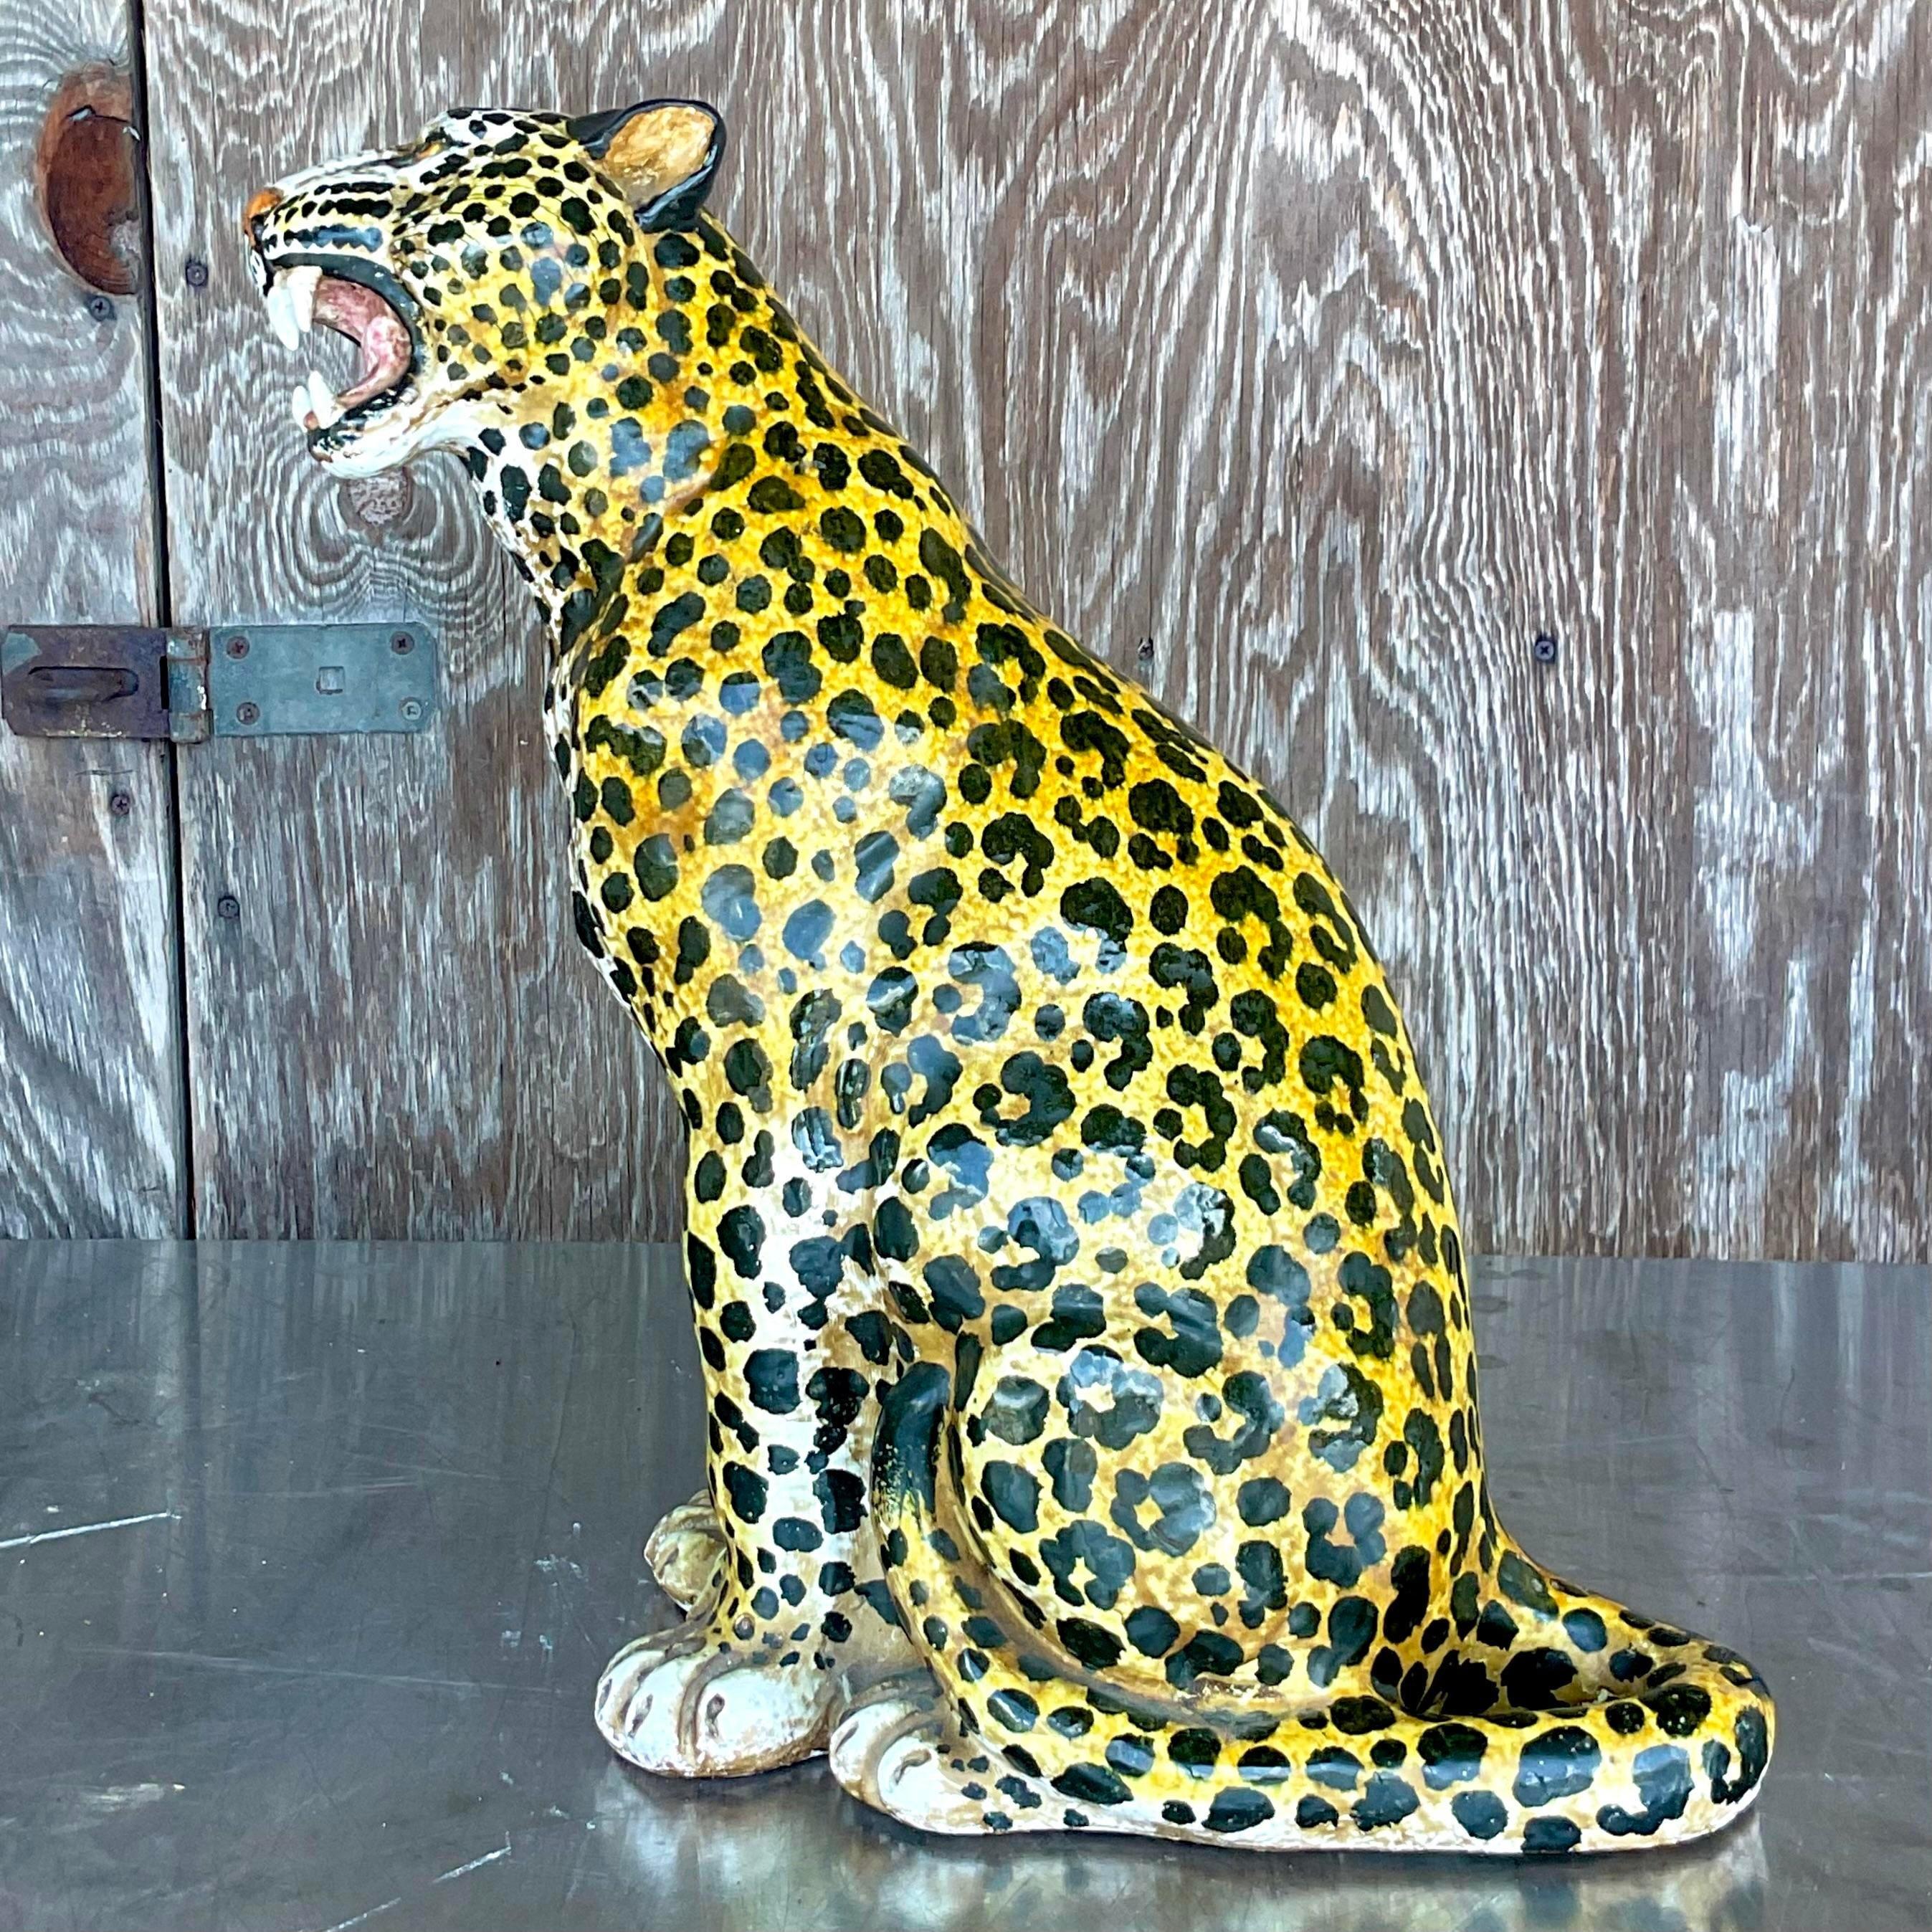 A fantastic vintage Boho leopard. A chic hand painted glazed ceramic with incredible attention to detail. Made in Italy. Acquired from a Palm Beach estate.